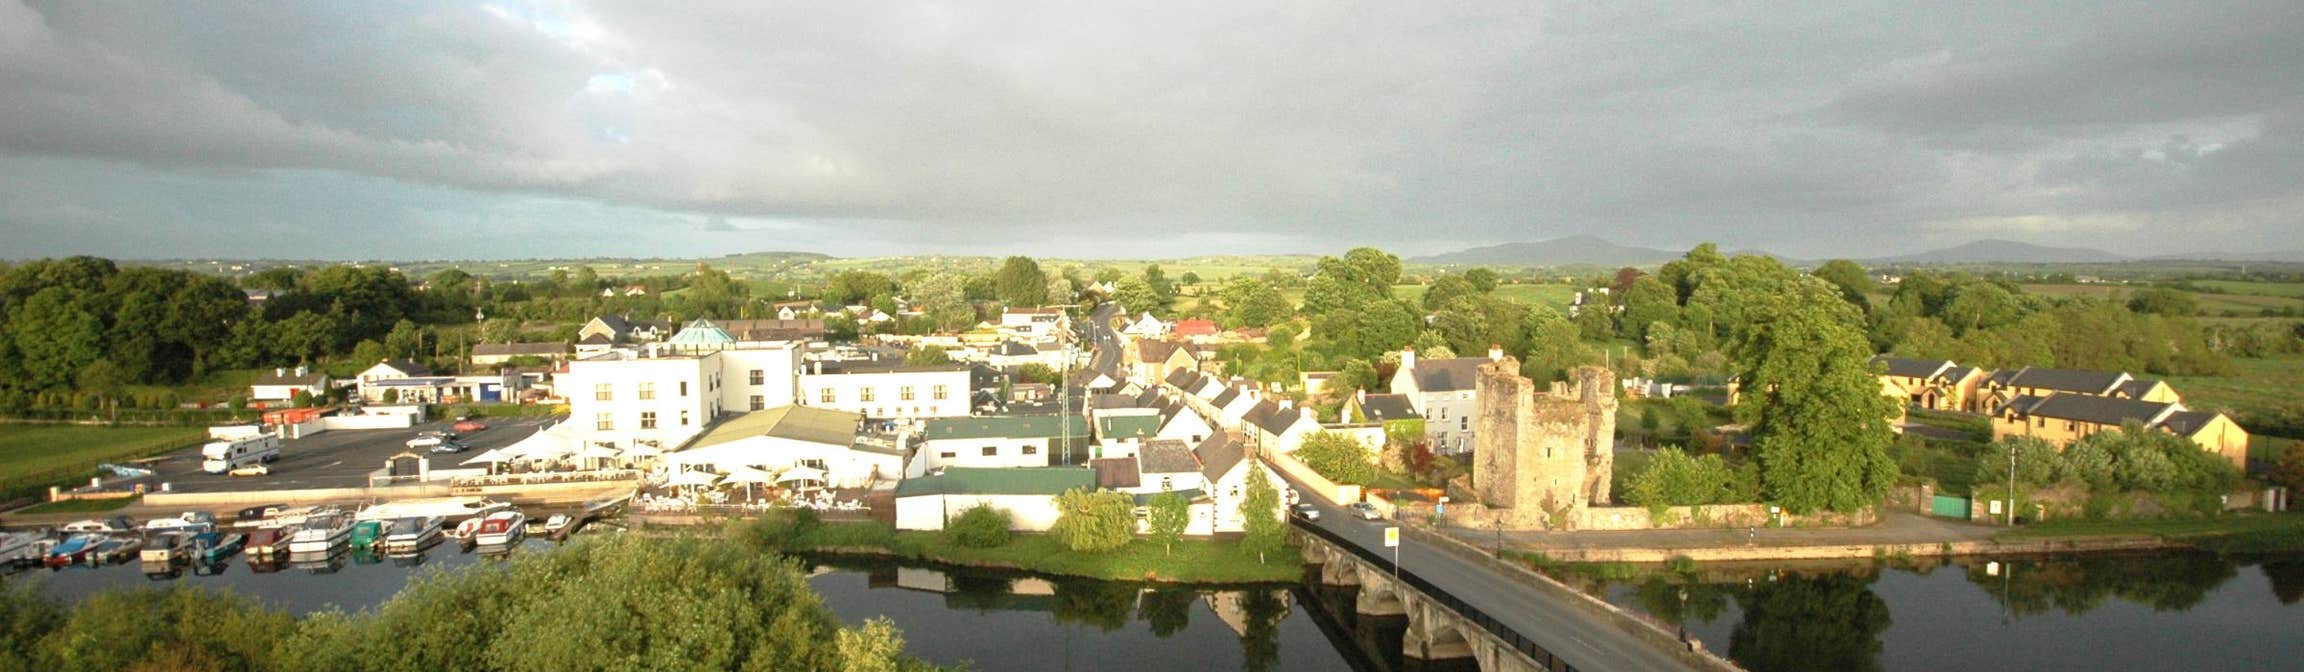 Image of Leighlinbridge in County Carlow